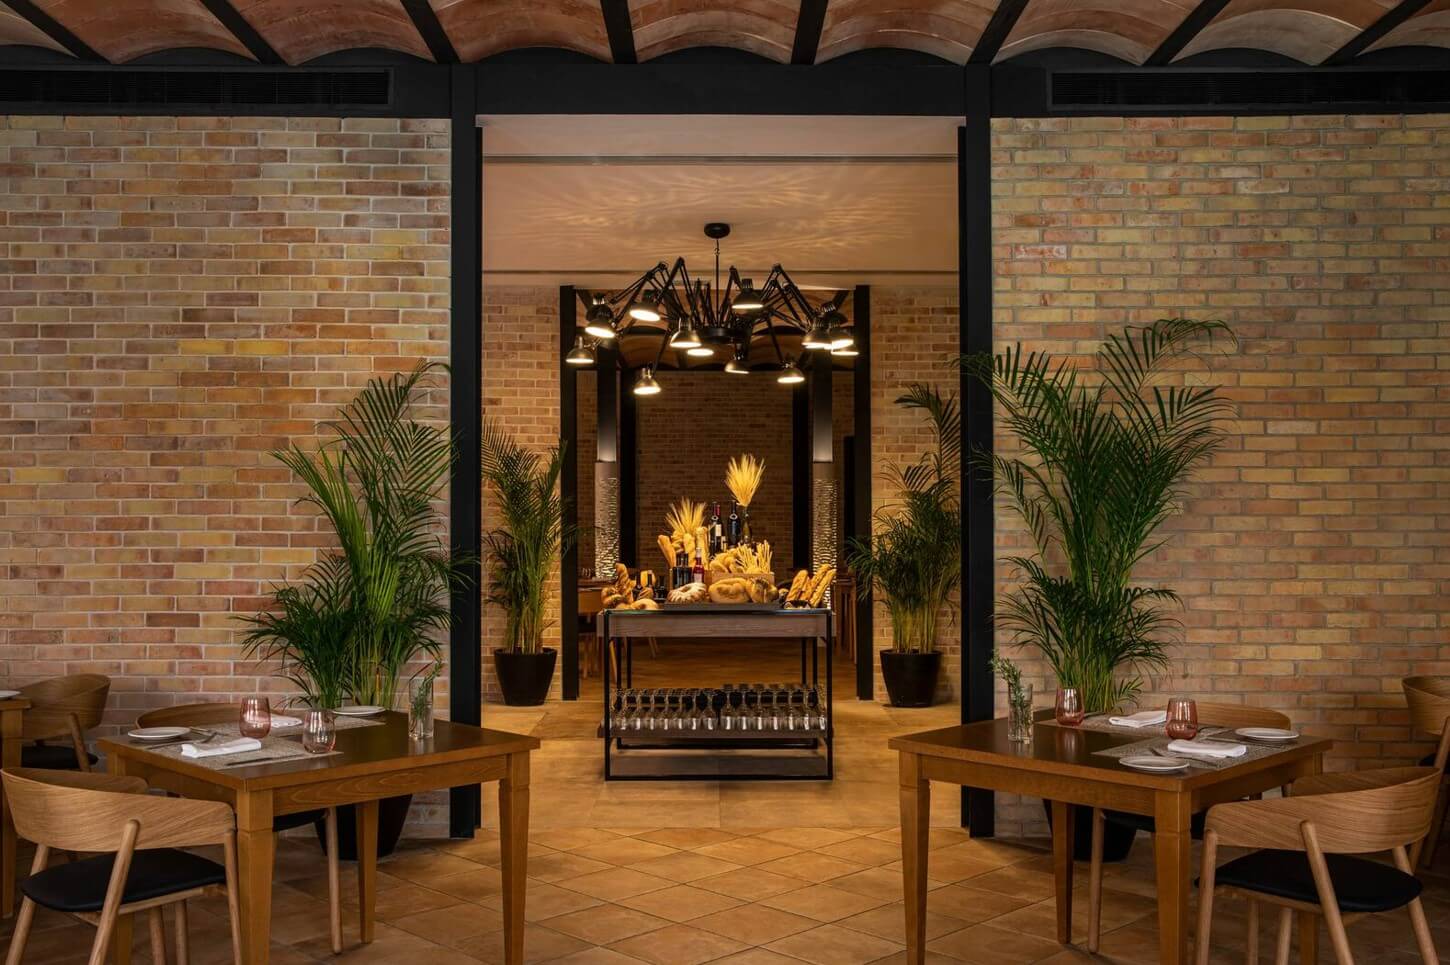 Italian restaurant with exposed bricks, wooden furniture and a display of bread